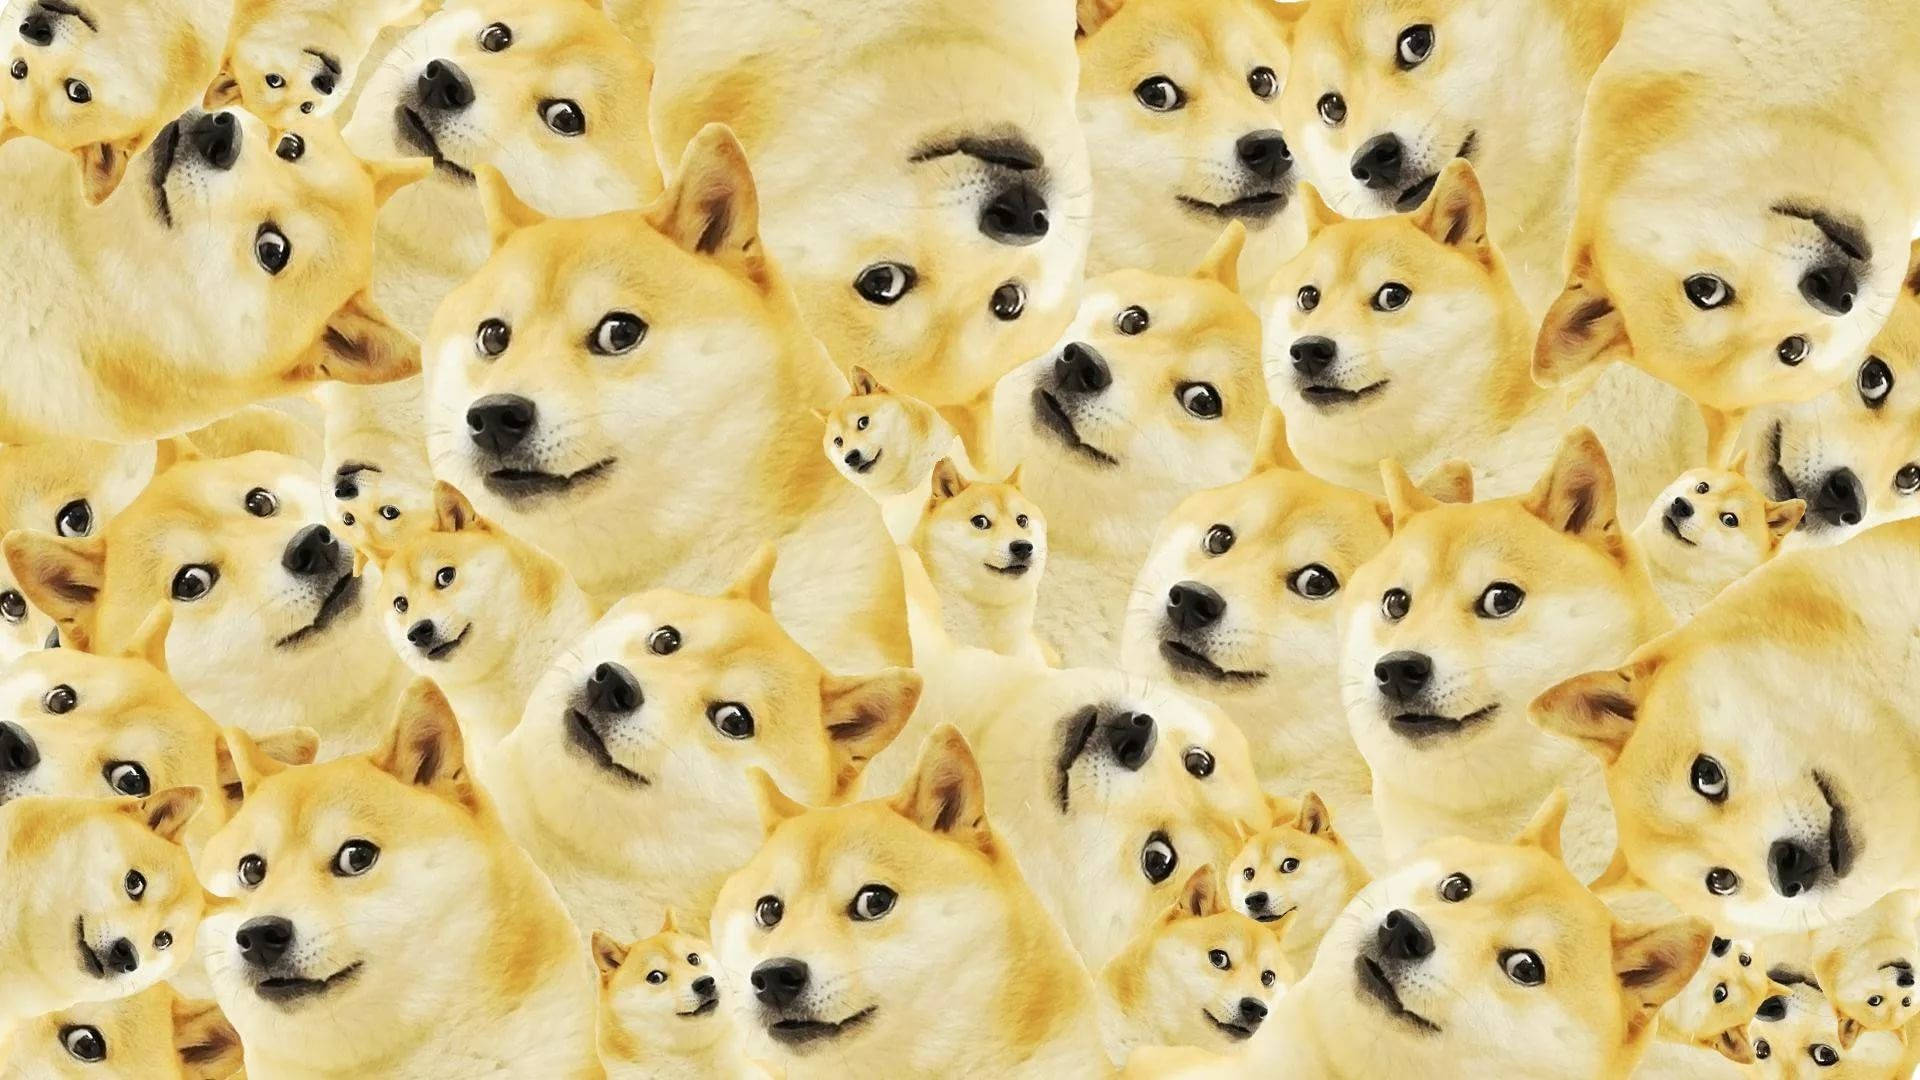 Multiple Doge Shiba Inu faces meme in one background showing his funny expression. 